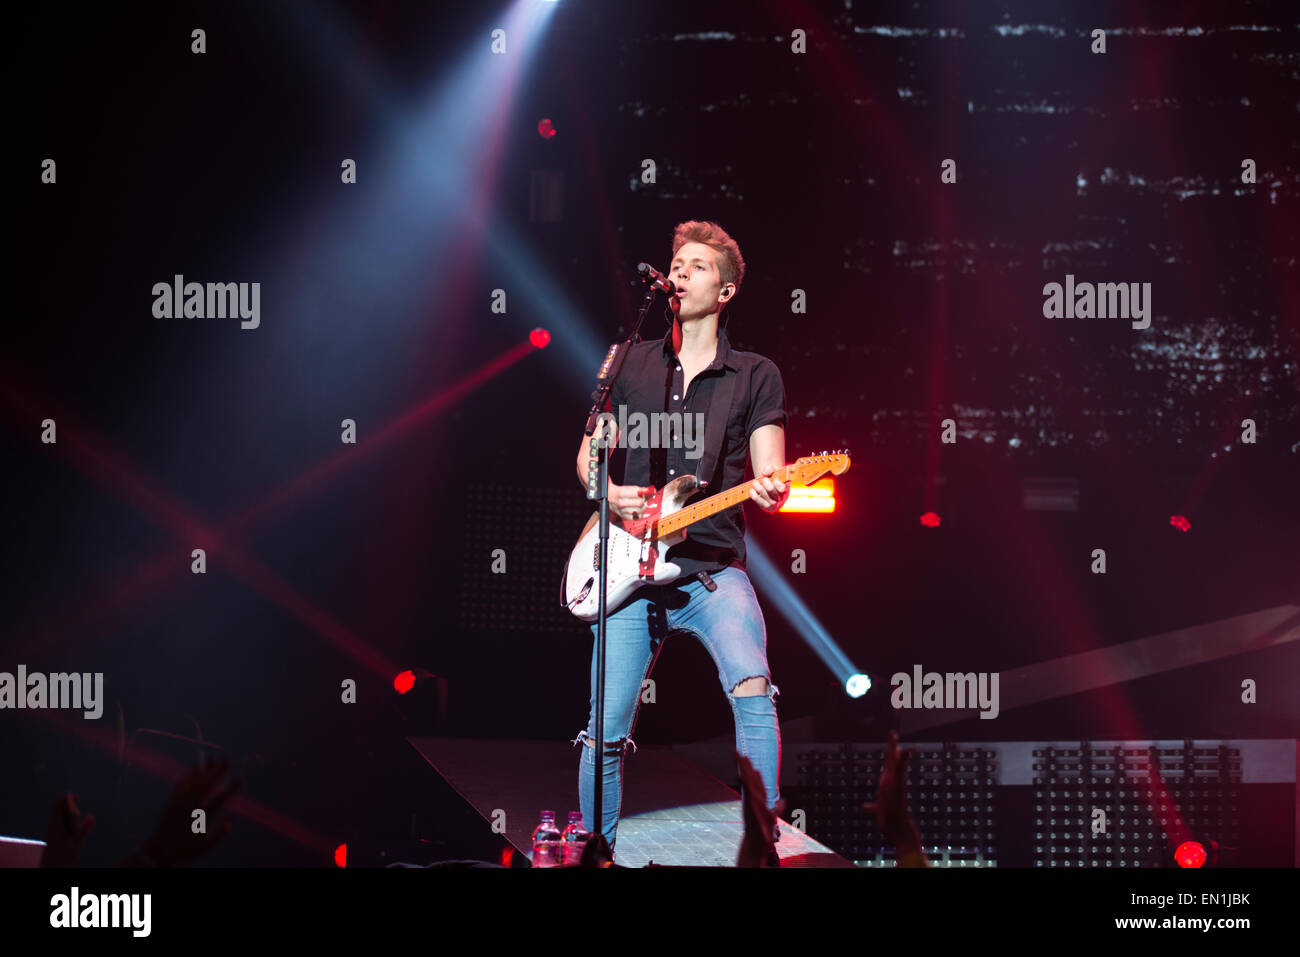 Manchester, UK. 25th April 2015. The Vamps perform live at The Manchester Arena       Credit:  Gary Mather/Alamy Live News Stock Photo